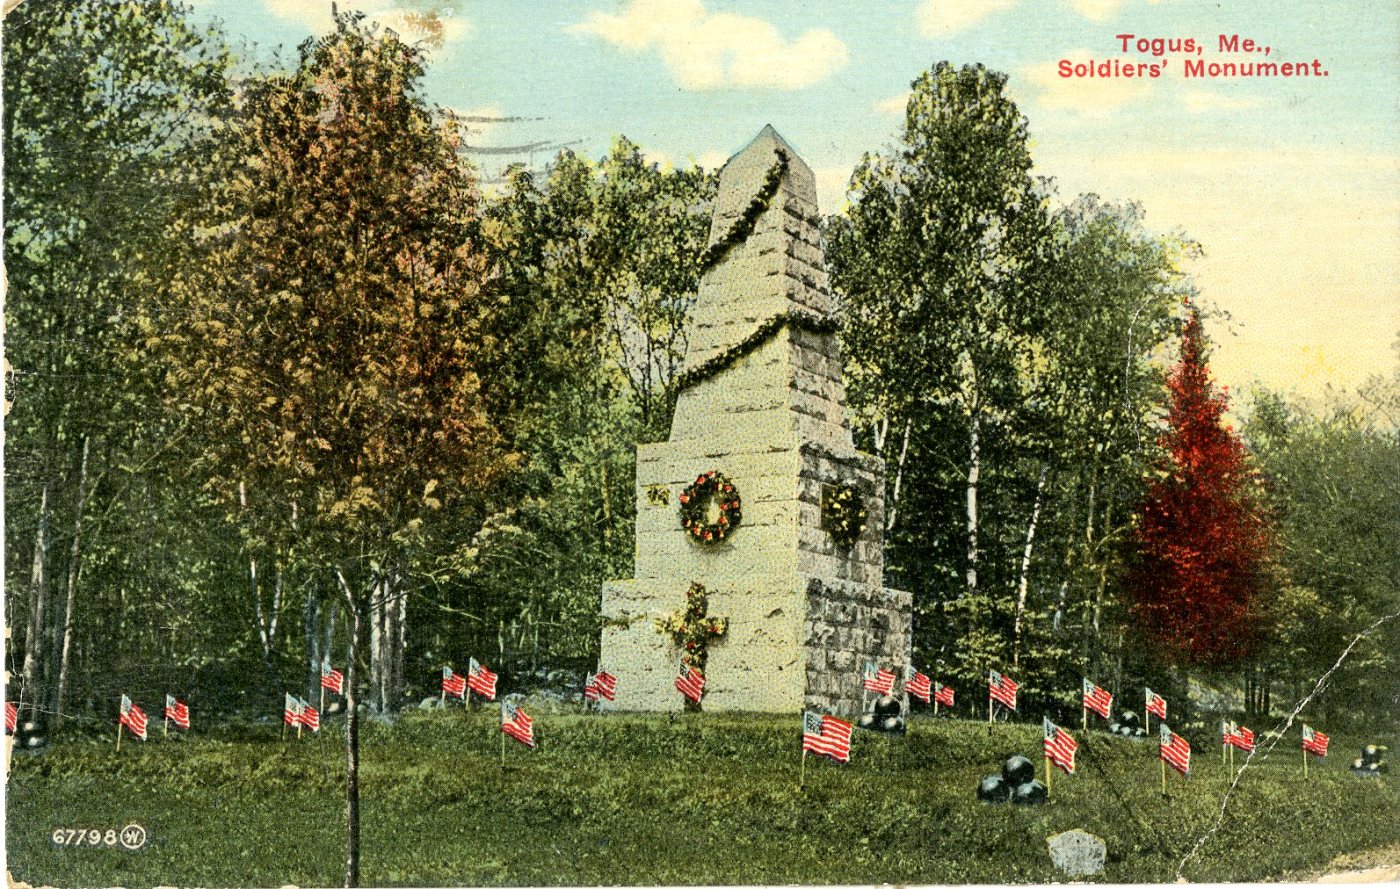 “Togus, Me., Soldiers’ Monument,” postmarked October 31, 1913. No publisher. (NCA)